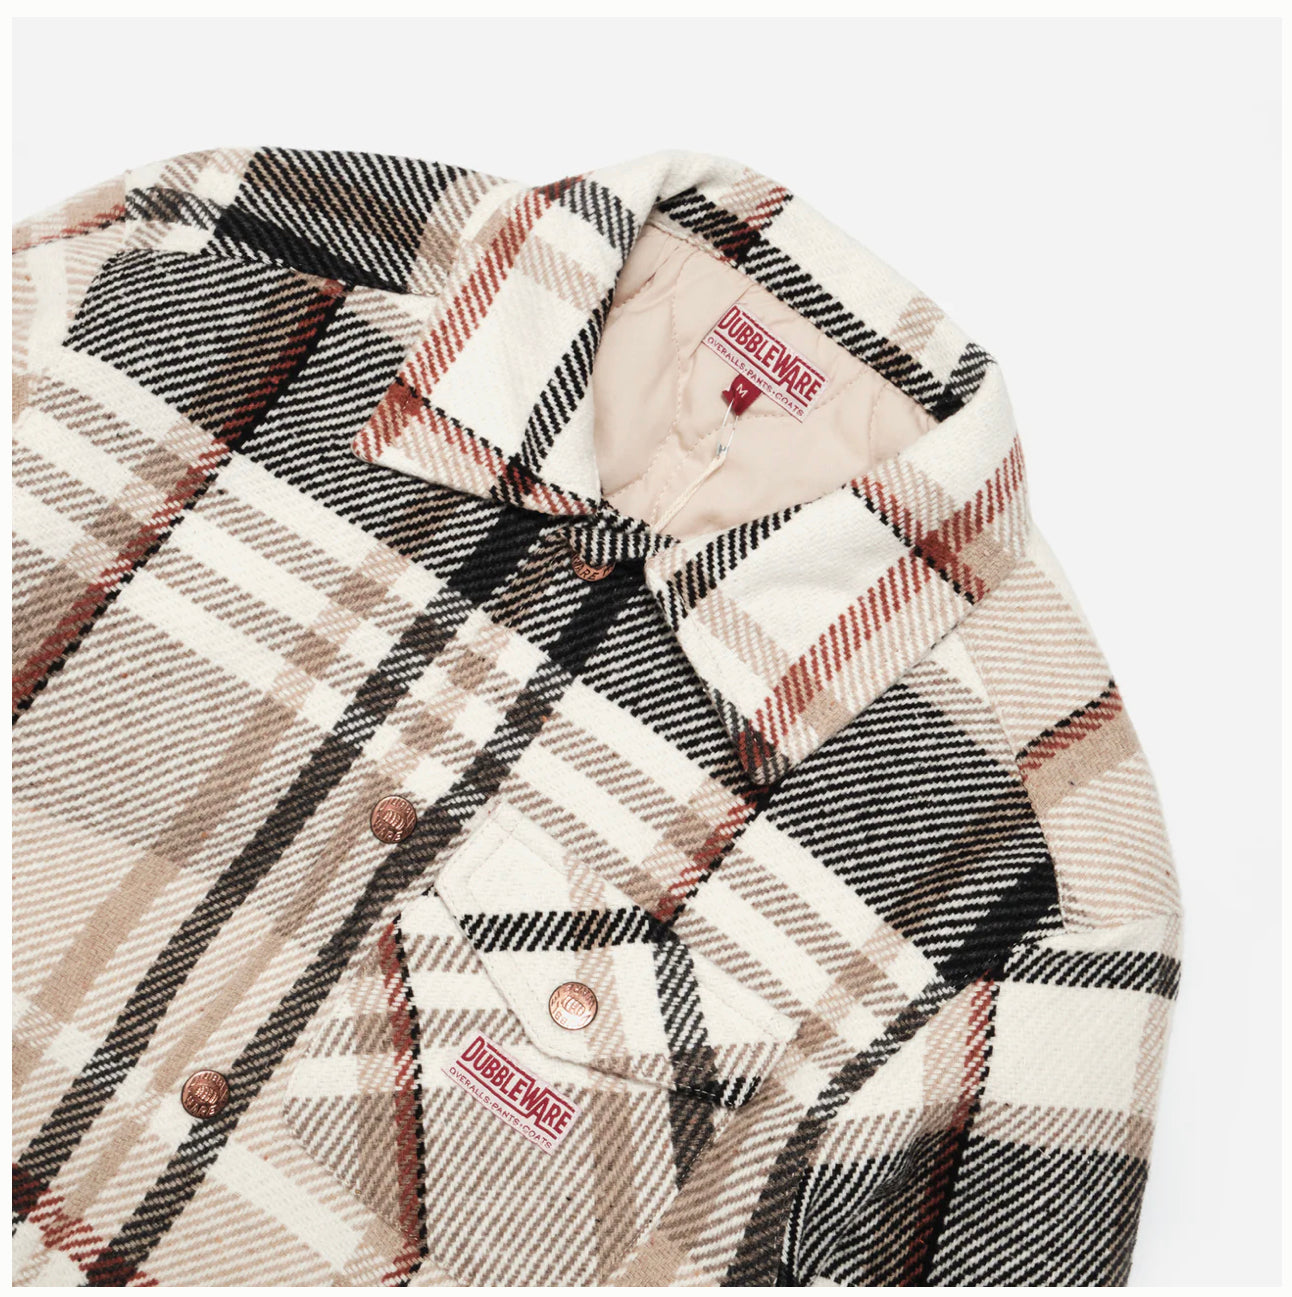 DUBBLEWARE Quilted Flannel Shirt - Beige/Navy/Red Check